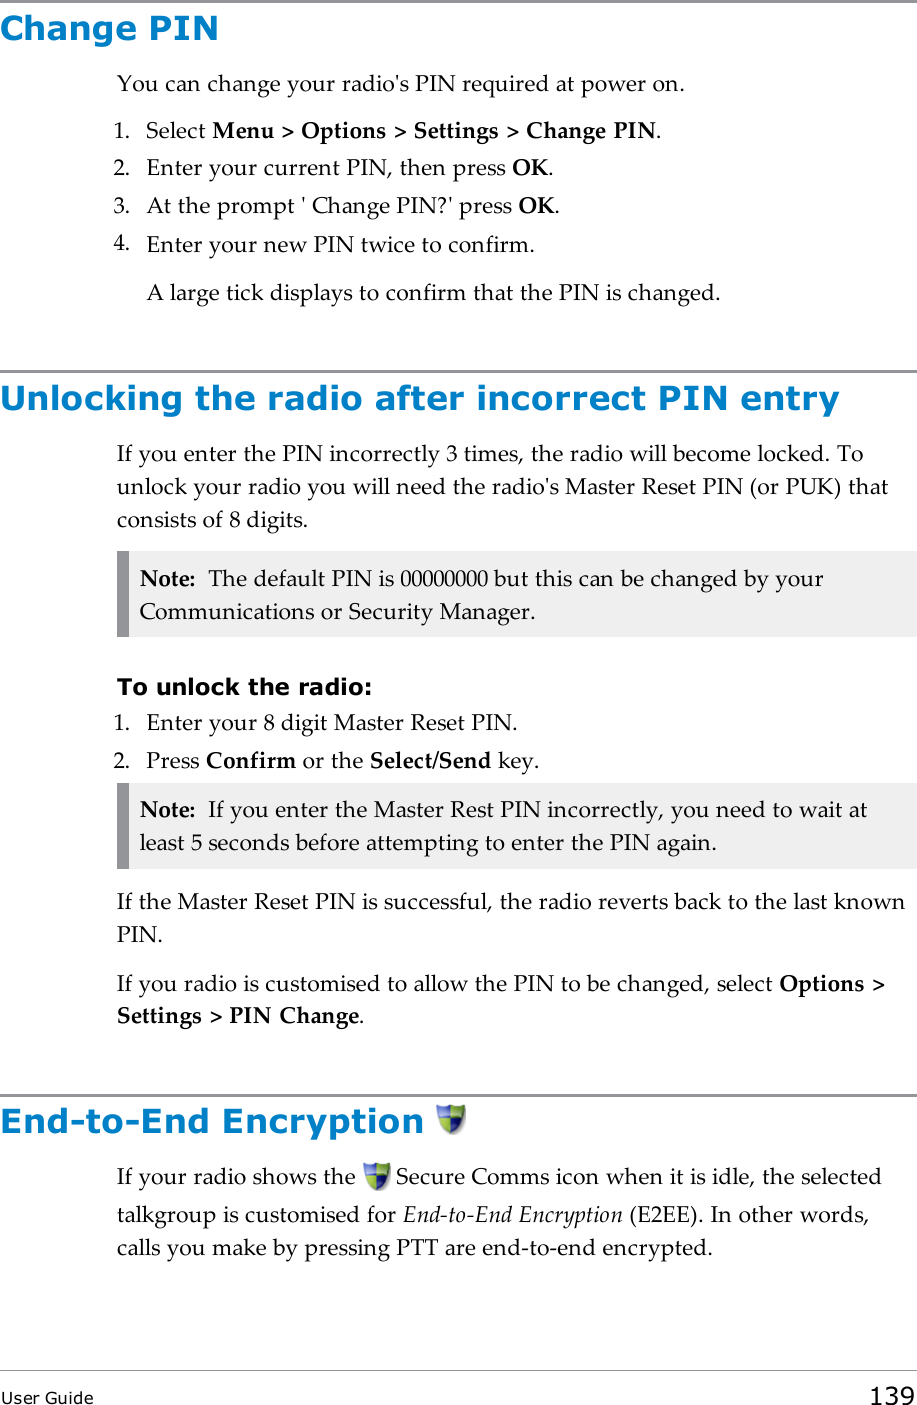 Change PINYou can change your radio&apos;s PIN required at power on.1. Select Menu &gt; Options &gt; Settings &gt; Change PIN.2. Enter your current PIN, then press OK.3. At the prompt &apos; Change PIN?&apos; press OK.4. Enter your new PIN twice to confirm.A large tick displays to confirm that the PIN is changed.Unlocking the radio after incorrect PIN entryIf you enter the PIN incorrectly 3 times, the radio will become locked. Tounlock your radio you will need the radio&apos;s Master Reset PIN (or PUK) thatconsists of 8 digits.Note: The default PIN is 00000000 but this can be changed by yourCommunications or Security Manager.To unlock the radio:1. Enter your 8 digit Master Reset PIN.2. Press Confirm or the Select/Send key.Note: If you enter the Master Rest PIN incorrectly, you need to wait atleast 5 seconds before attempting to enter the PIN again.If the Master Reset PIN is successful, the radio reverts back to the last knownPIN.If you radio is customised to allow the PIN to be changed, select Options &gt;Settings &gt; PIN Change.End-to-End EncryptionIf your radio shows the Secure Comms icon when it is idle, the selectedtalkgroup is customised for End-to-End Encryption (E2EE). In other words,calls you make by pressing PTT are end-to-end encrypted.User Guide 139